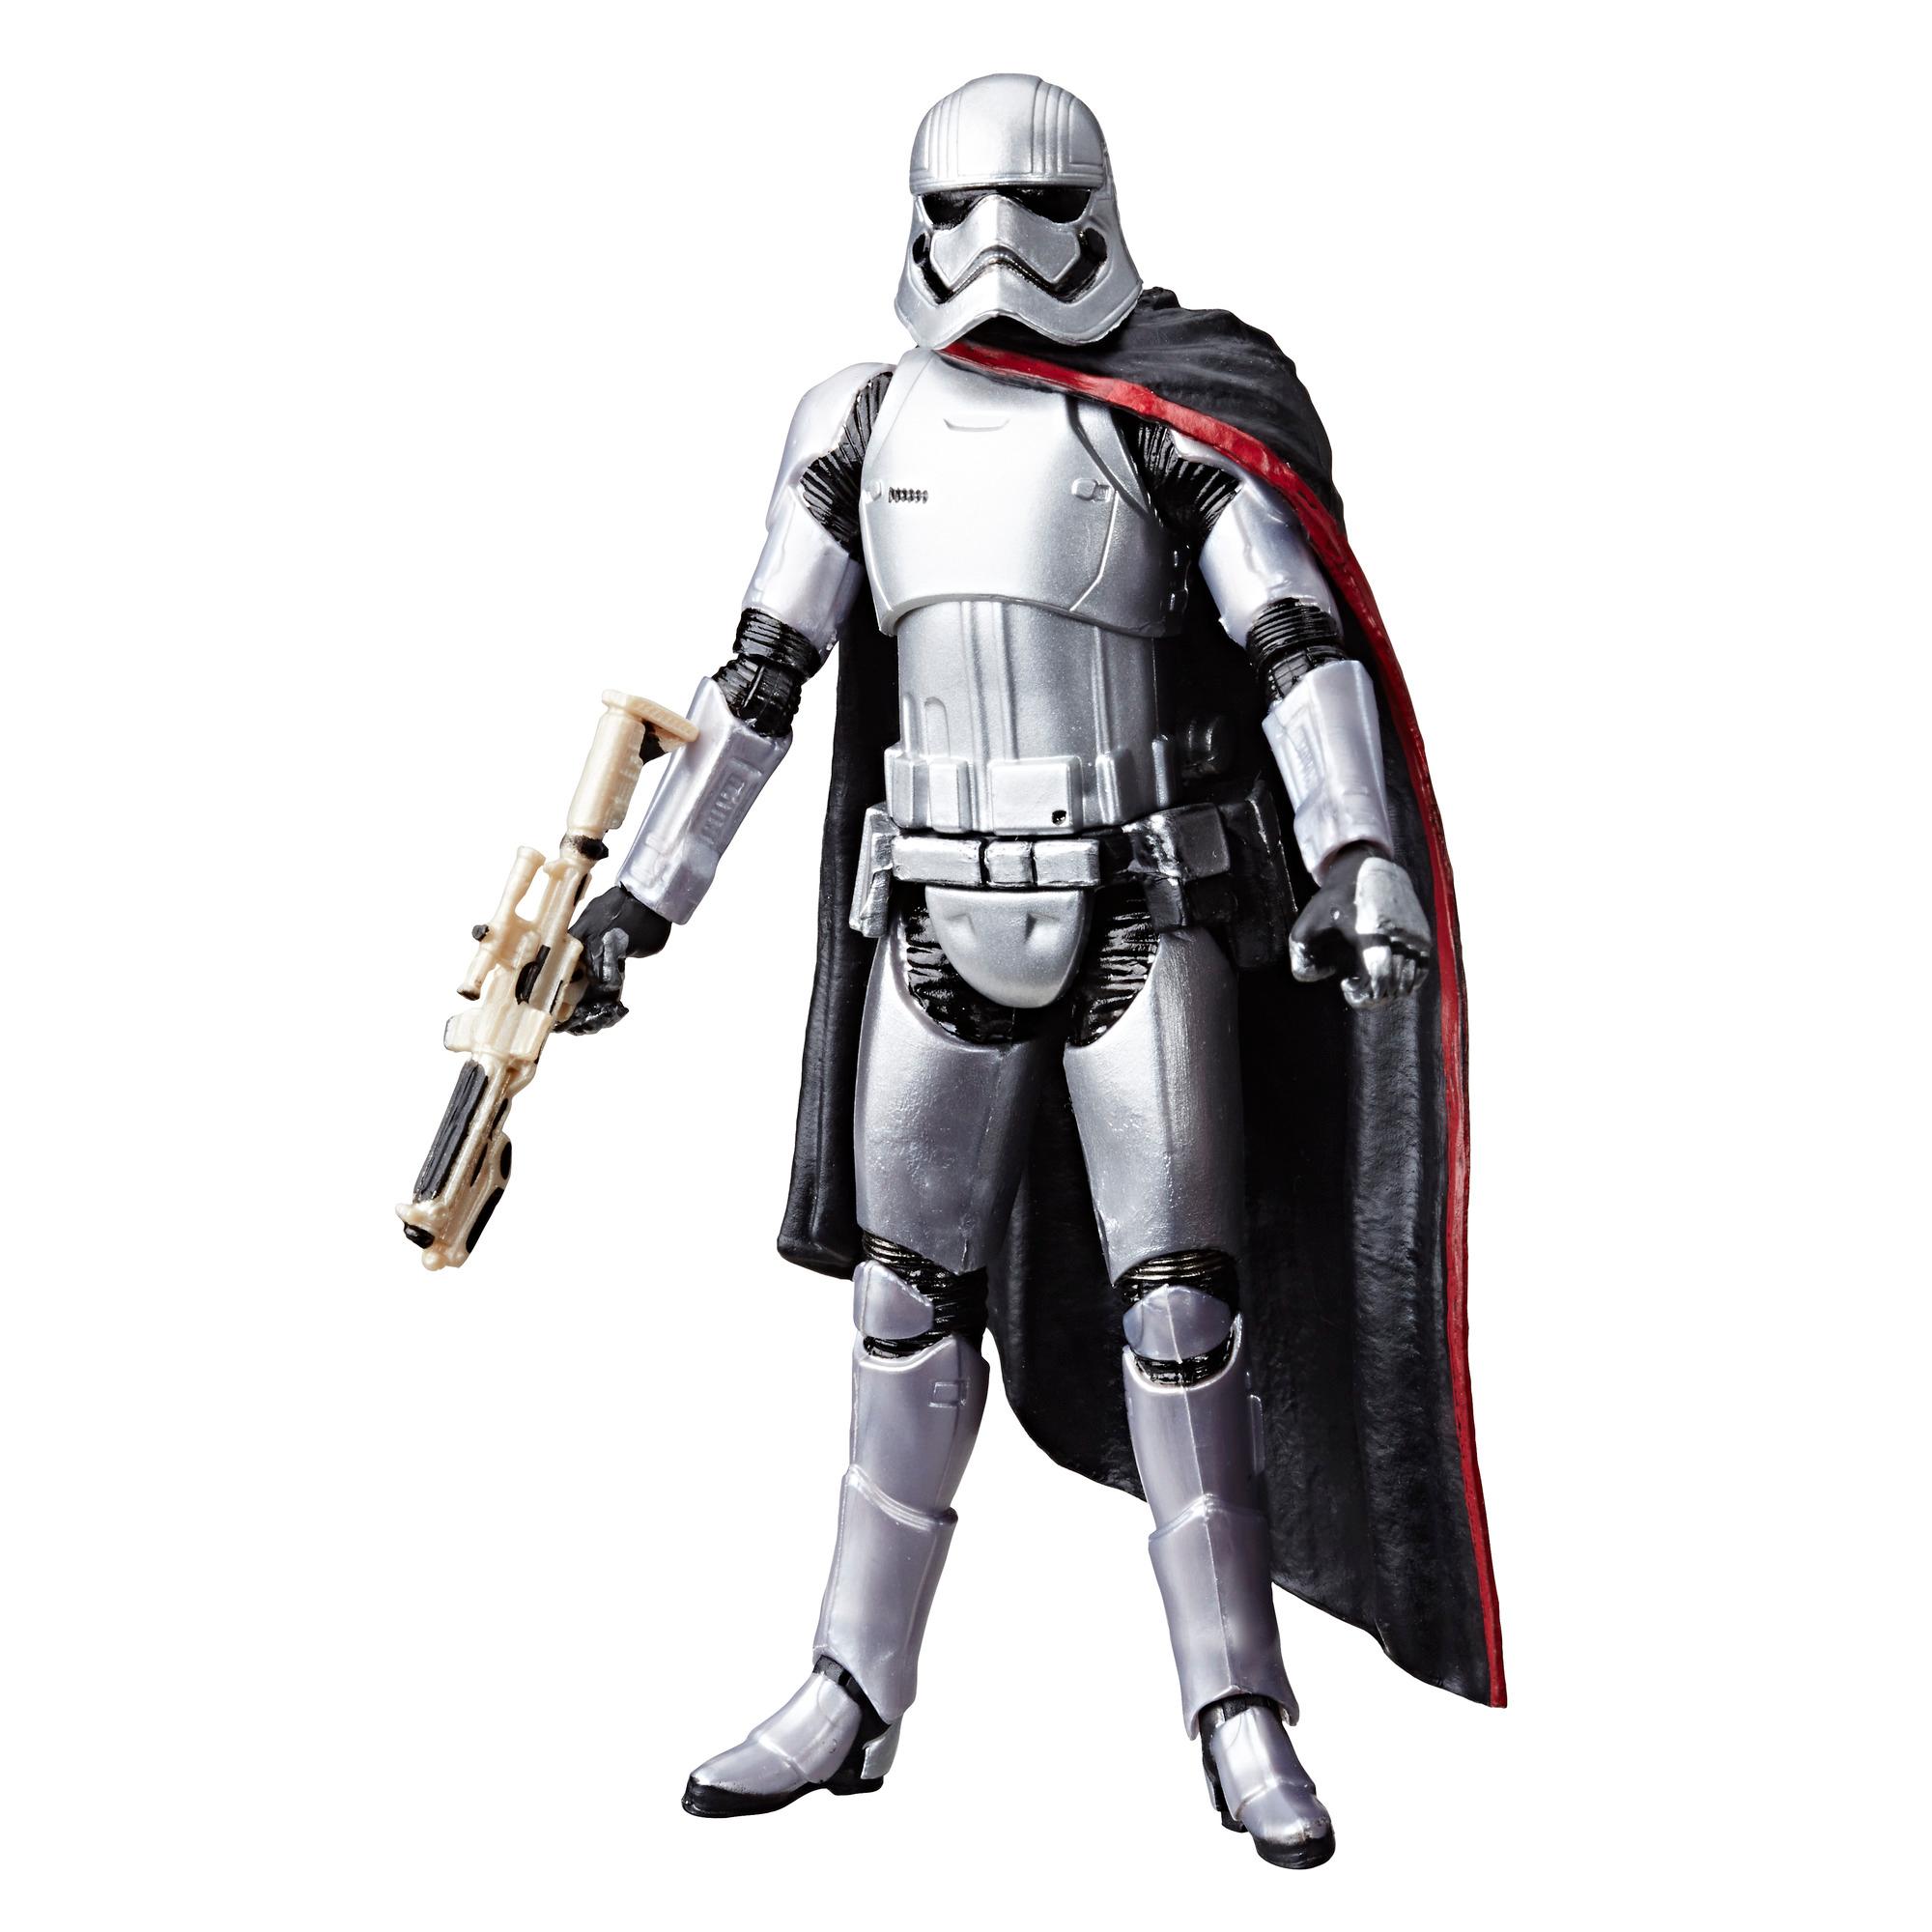 Star Wars The Vintage Collection Star Wars: The Force Awakens Captain Phasma 3.75-inch Figure